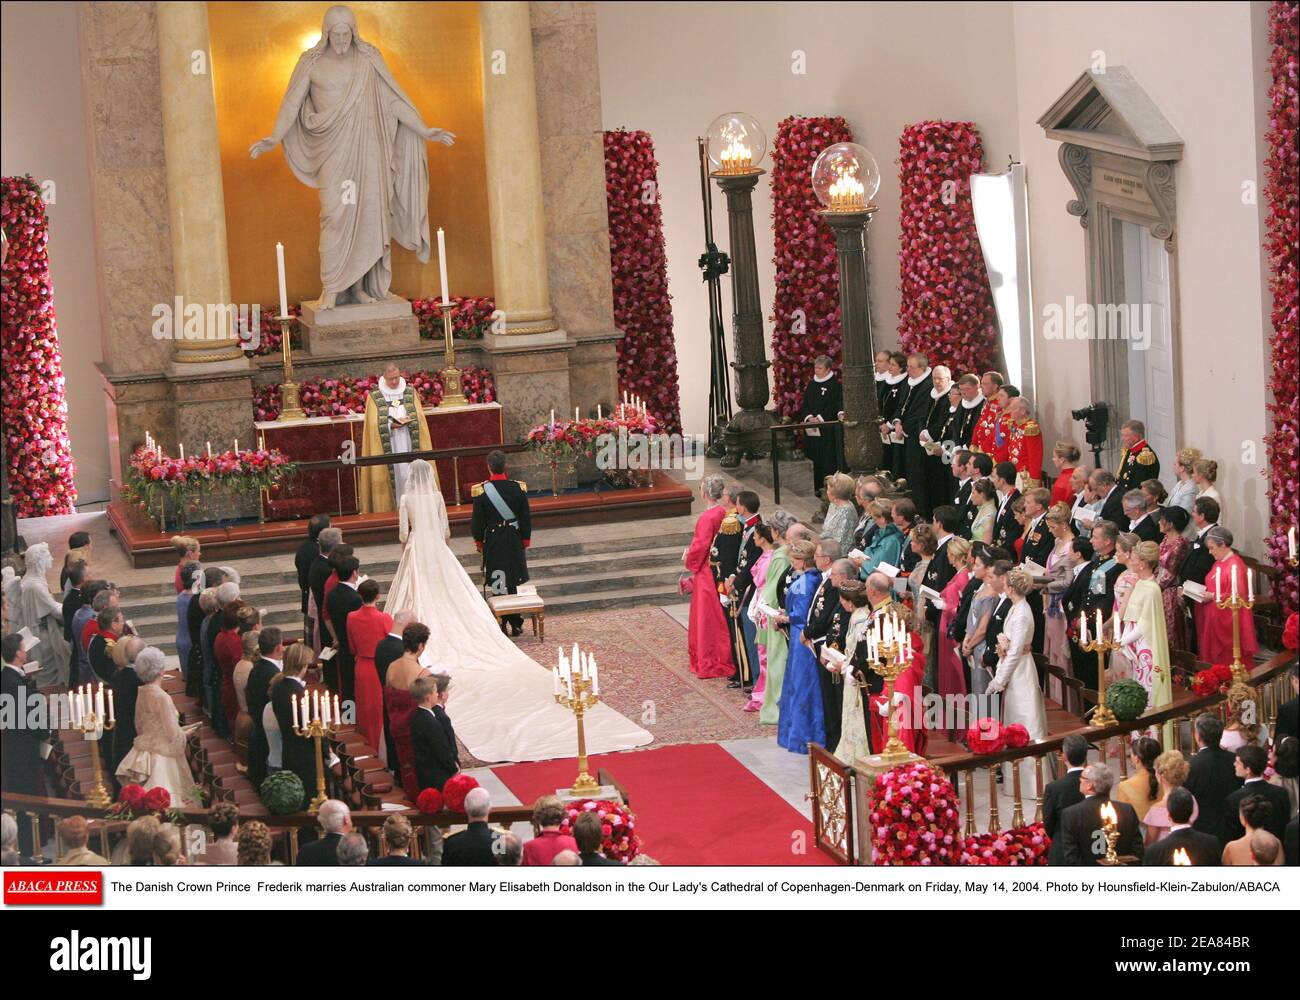 The Danish Crown Prince Frederik marries Australian commoner Mary Elisabeth Donaldson in the Our Lady's Cathedral of Copenhagen-Denmark on Friday, May 14, 2004. Photo by Hounsfield-Klein-Zabulon/ABACA Stock Photo